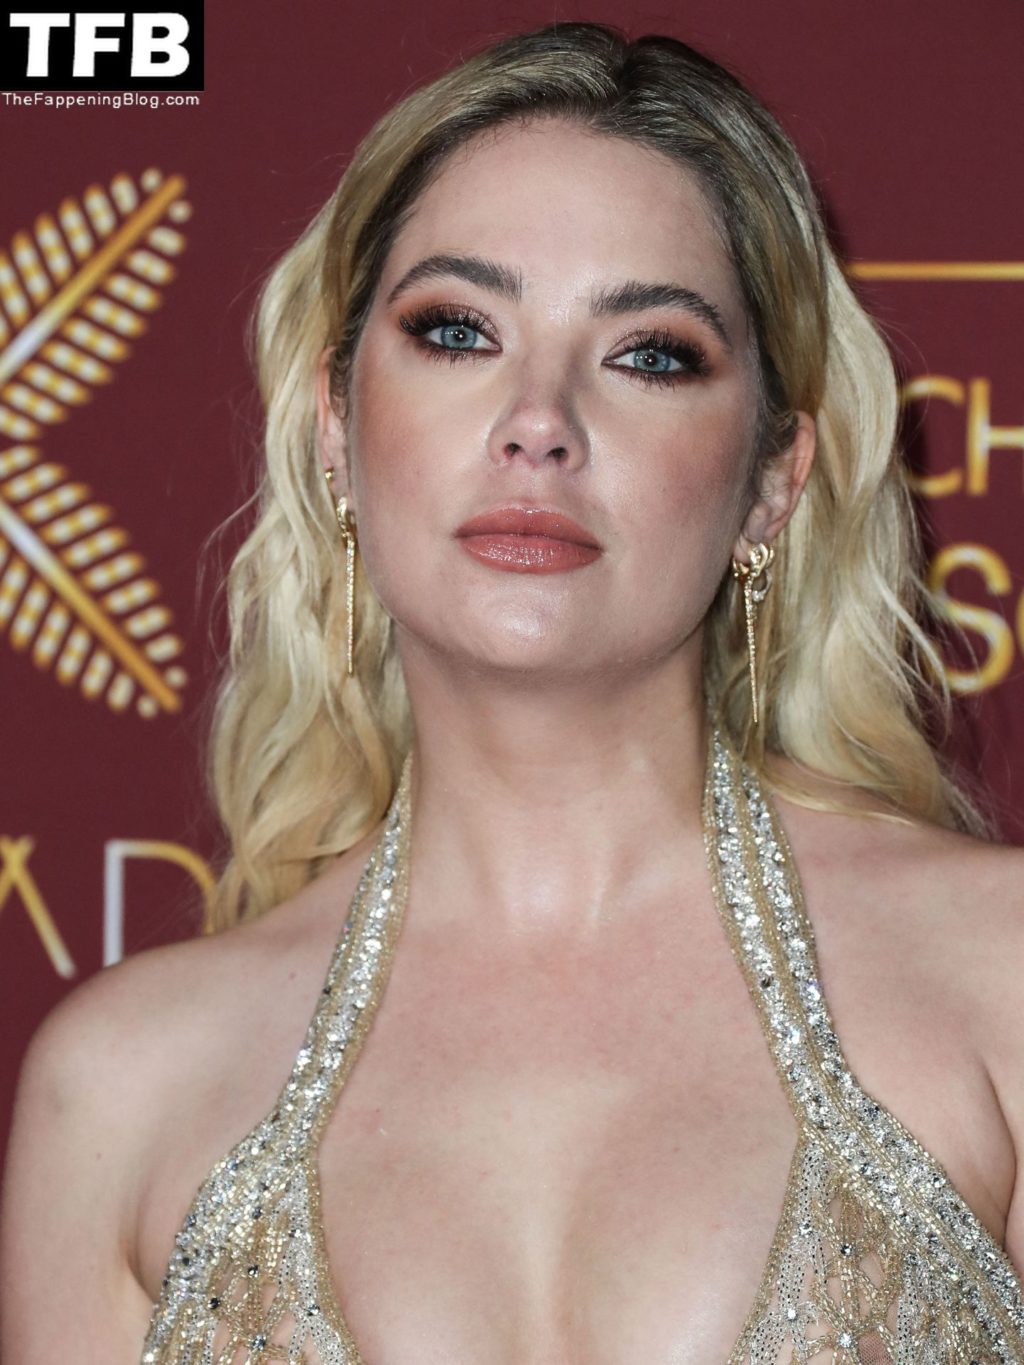 Ashley Benson Sexy The Fappening Blog 16 1024x1365 - Ashley Benson Displays Nice Cleavage at the Darren Dzienciol and Richie Akiva Oscar Party (39 Photos)